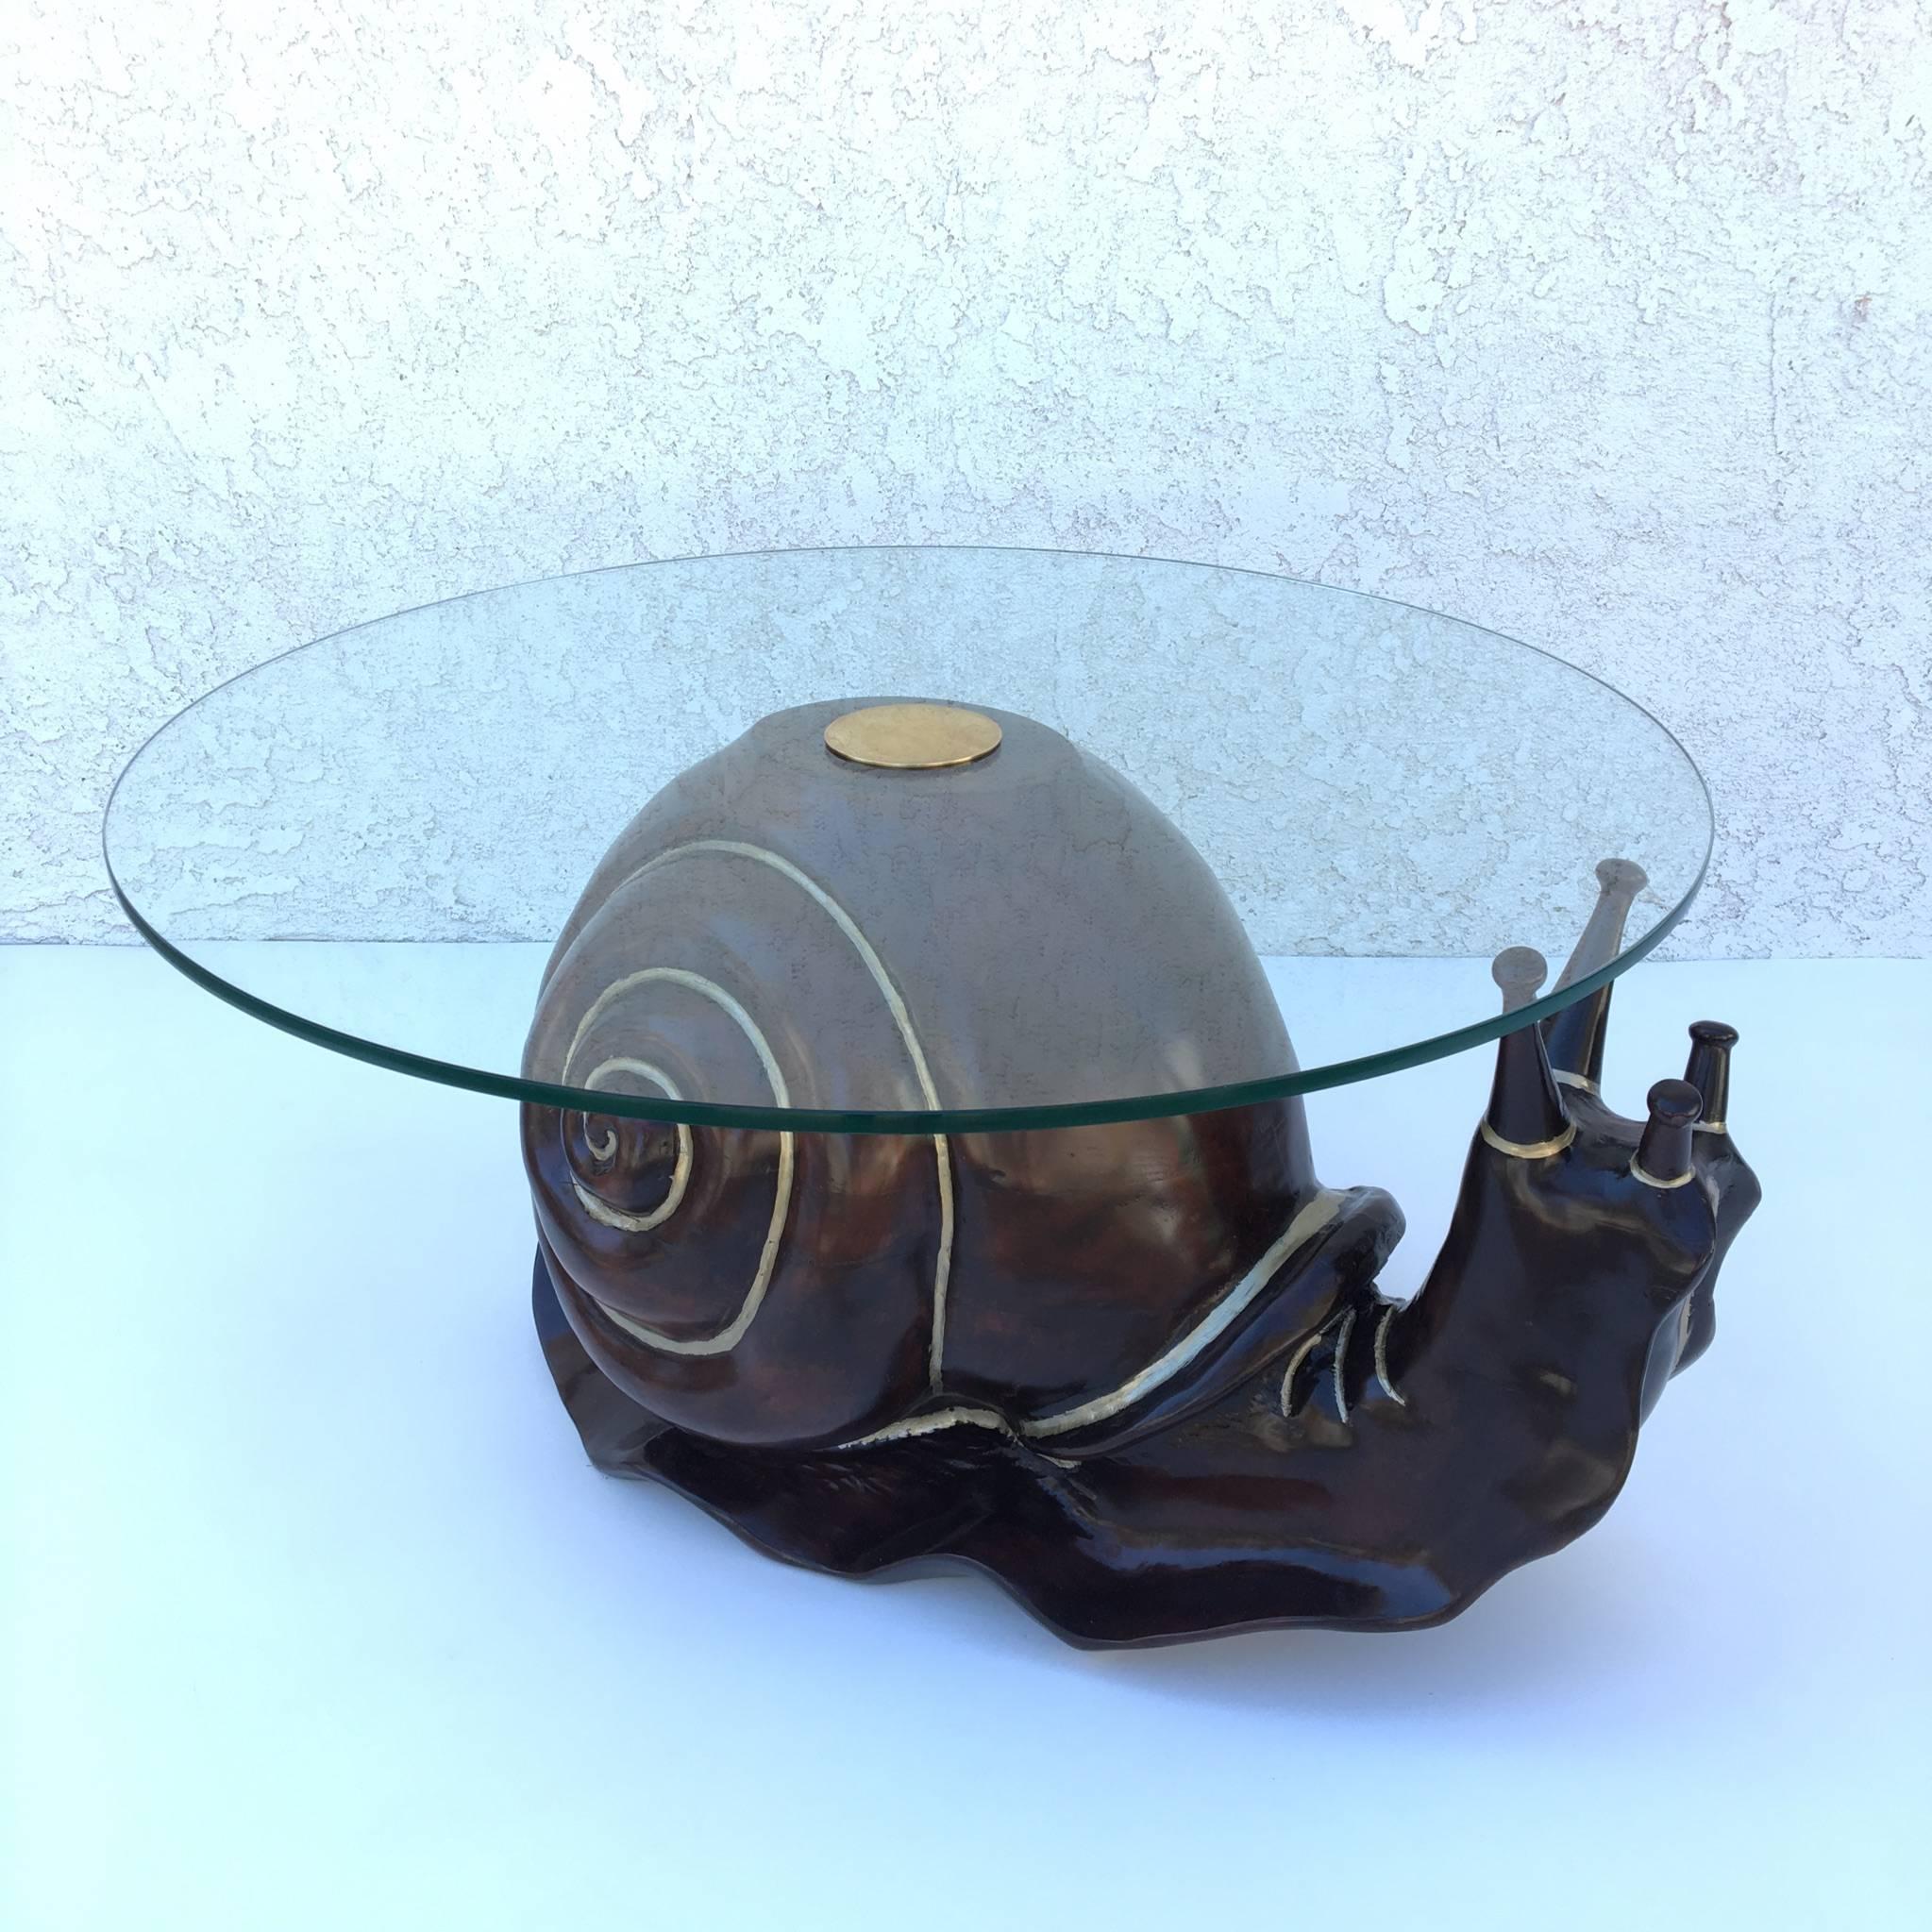 An amazing hand-carved snail cocktail table with a new 1/2